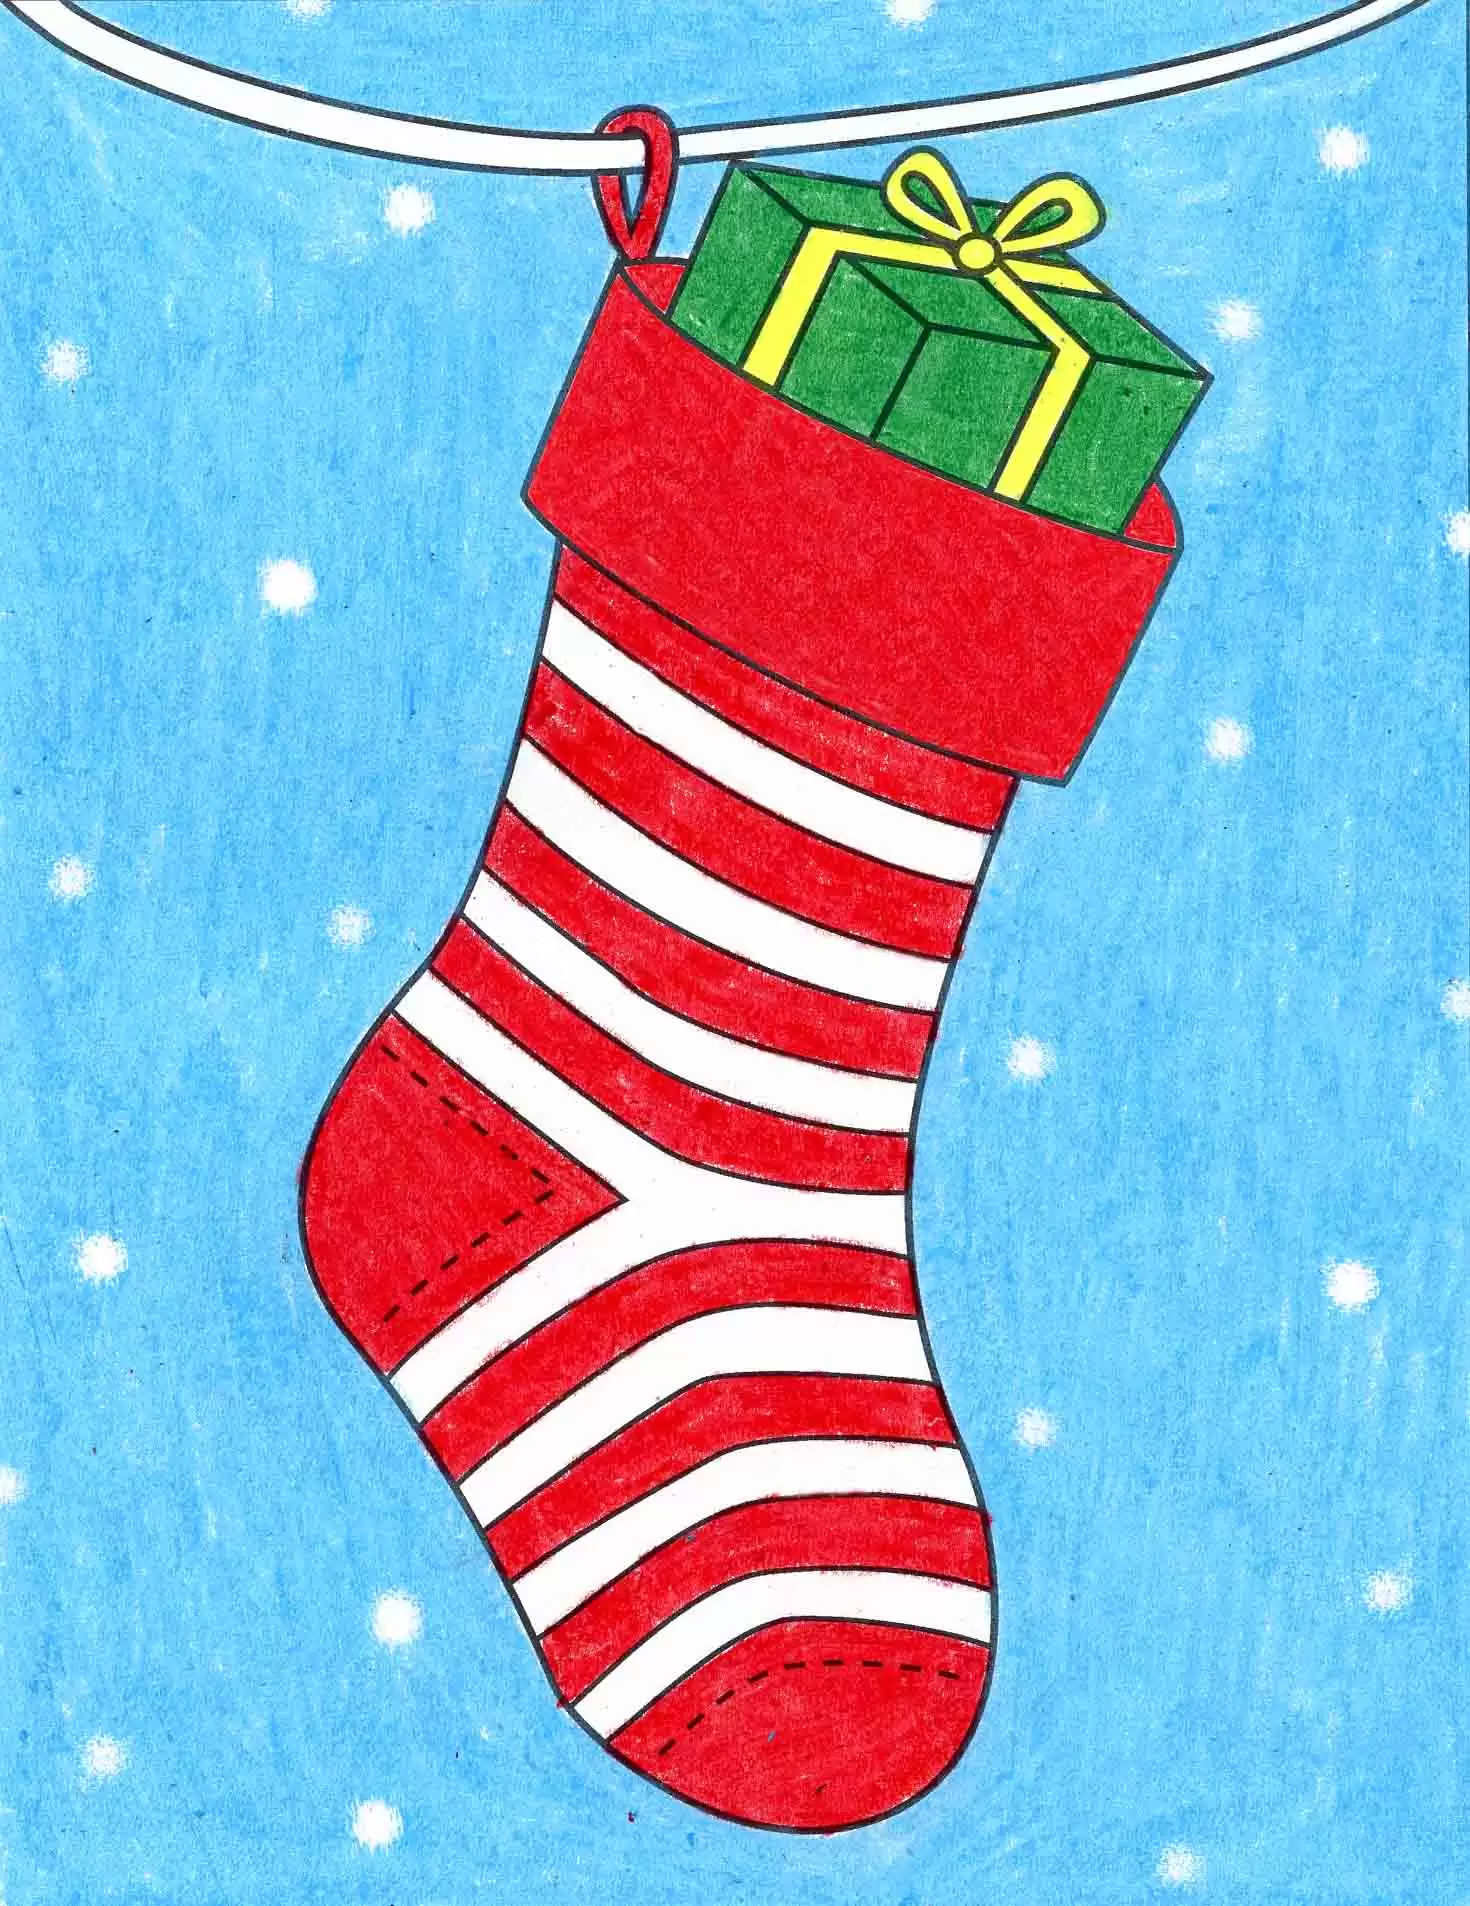 Easy How to Draw a Christmas Stocking Tutorial and Stocking Coloring Page